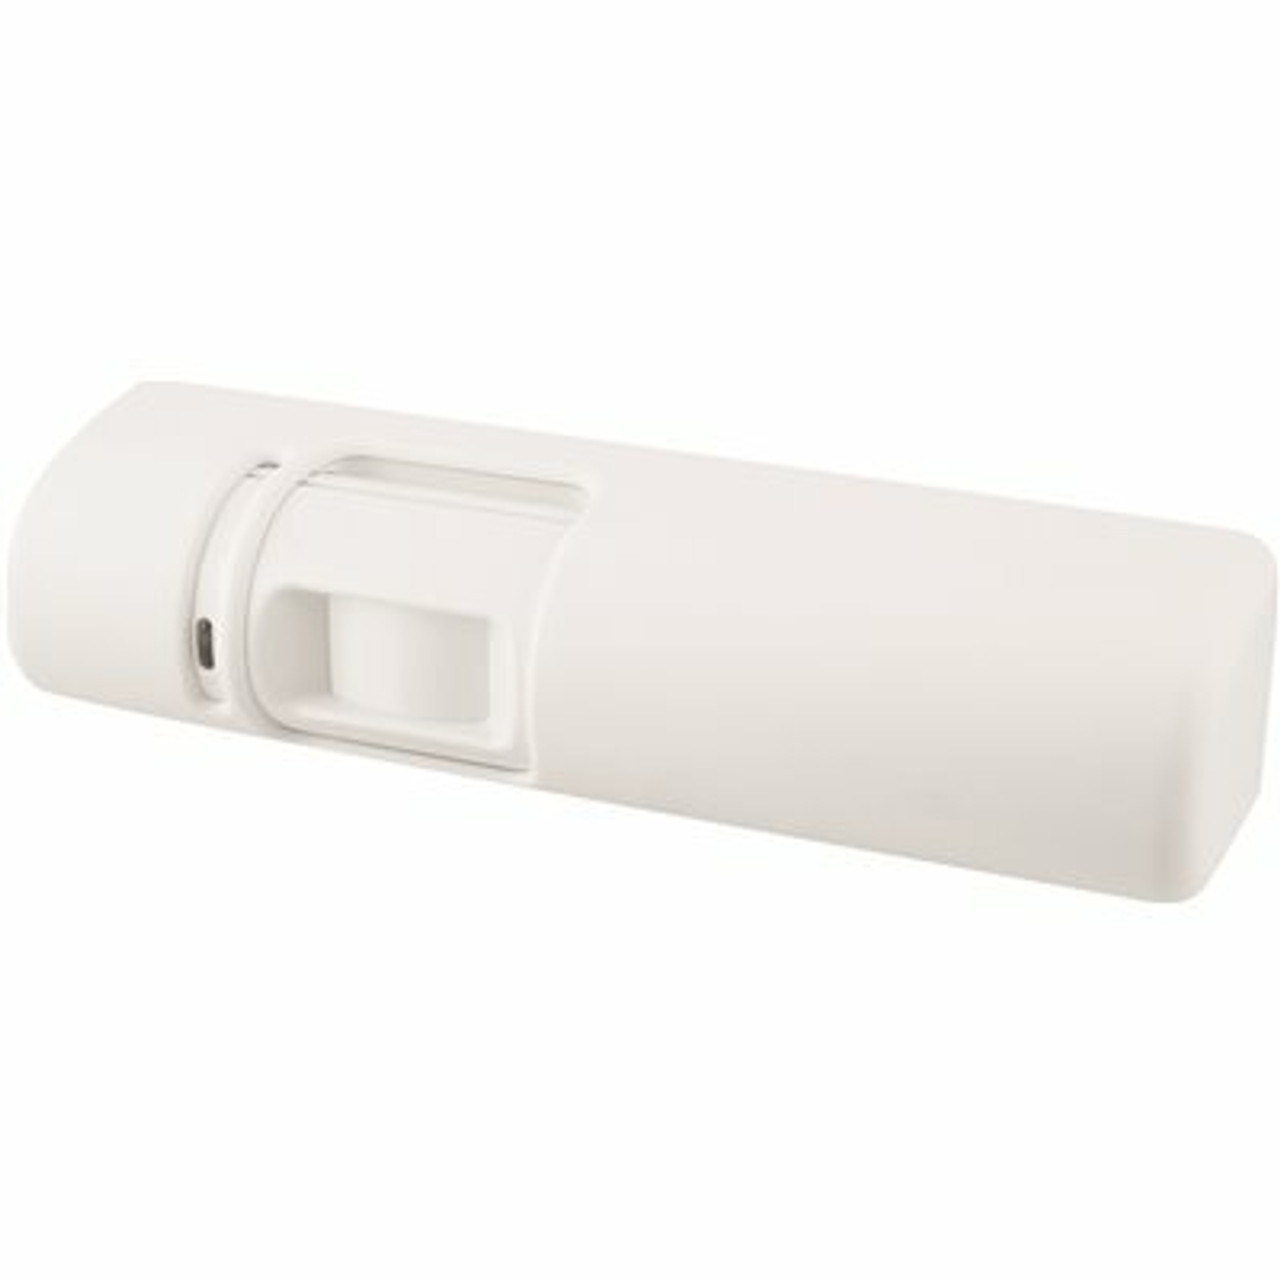 Md31D Series White Infrared Request To Exit Motion Sensor